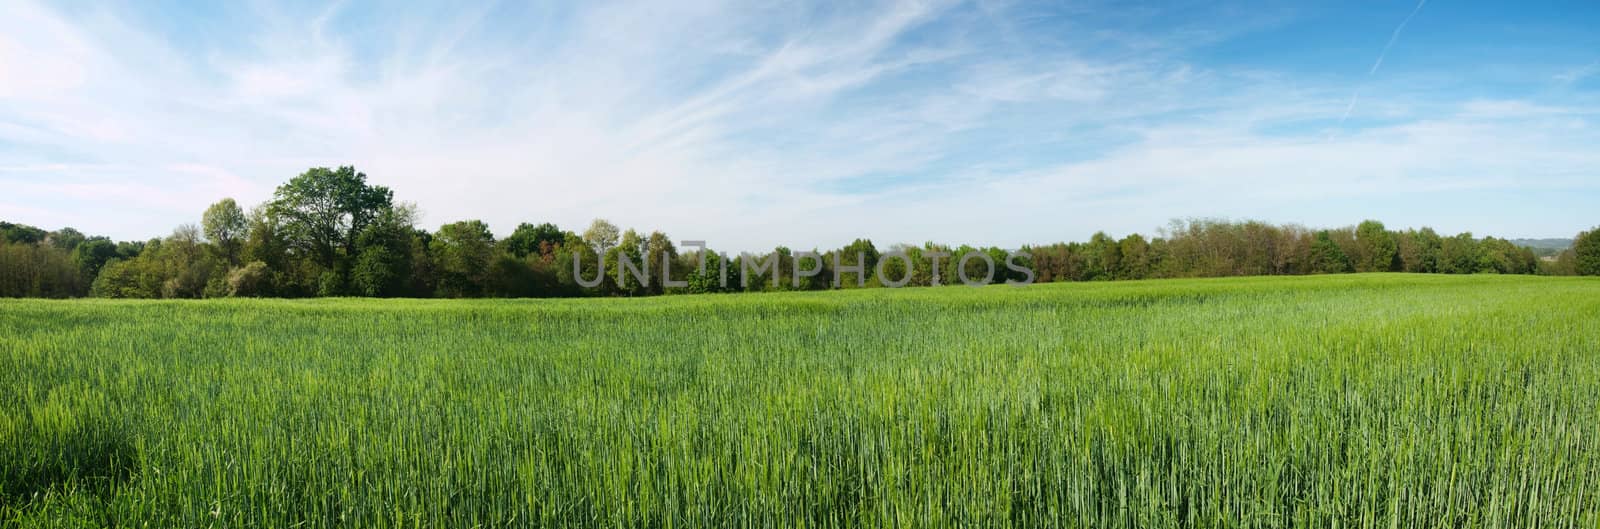 Panorama of a fresh green barley field in the French countryside